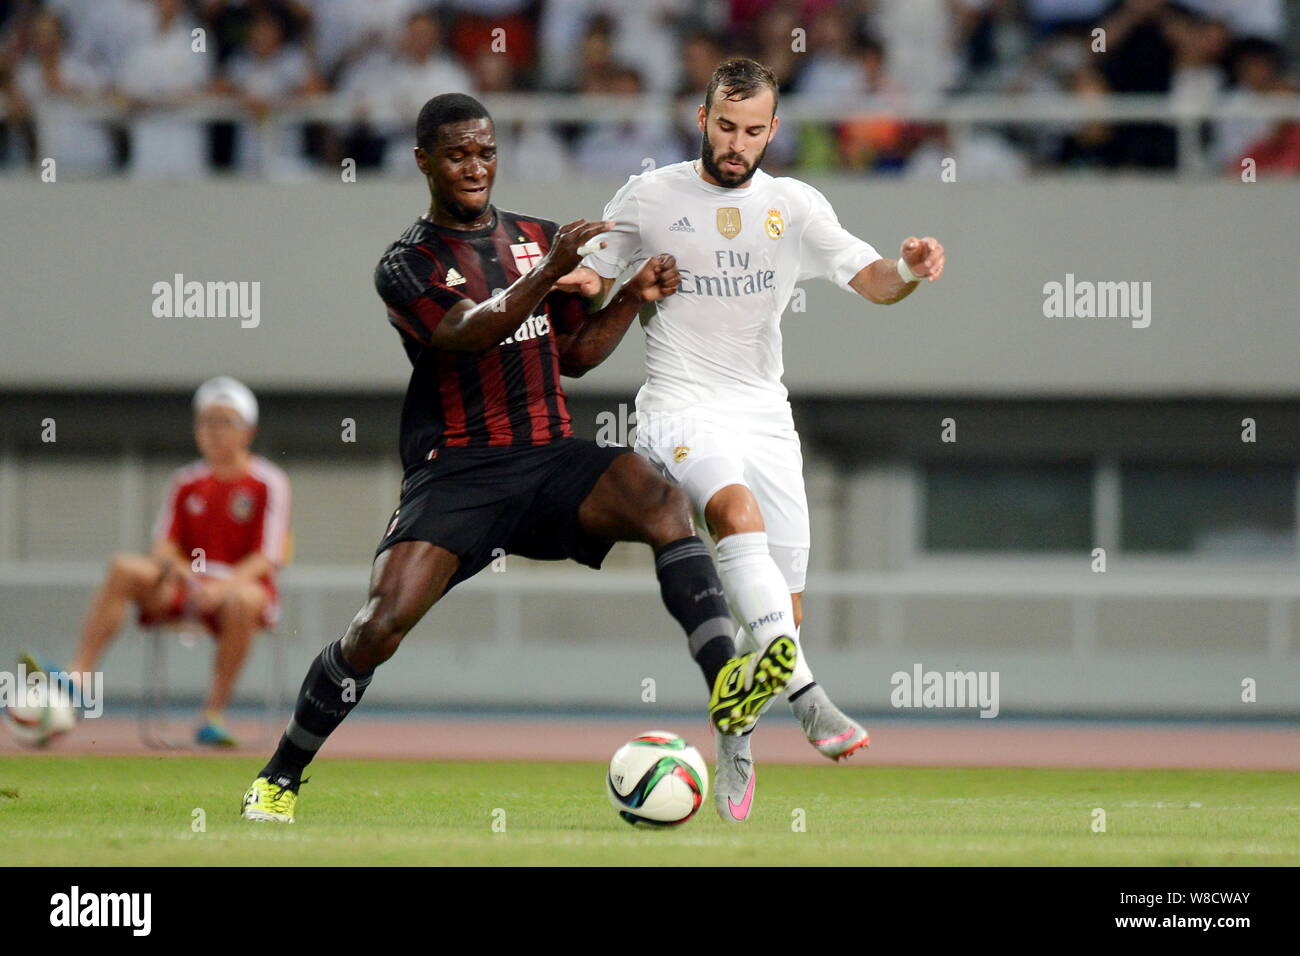 Jese of Real Madrid, right, challenges Cristian Eduardo Zapata Valencia of AC Milan during the Shanghai match of the International Champions Cup 2015 Stock Photo